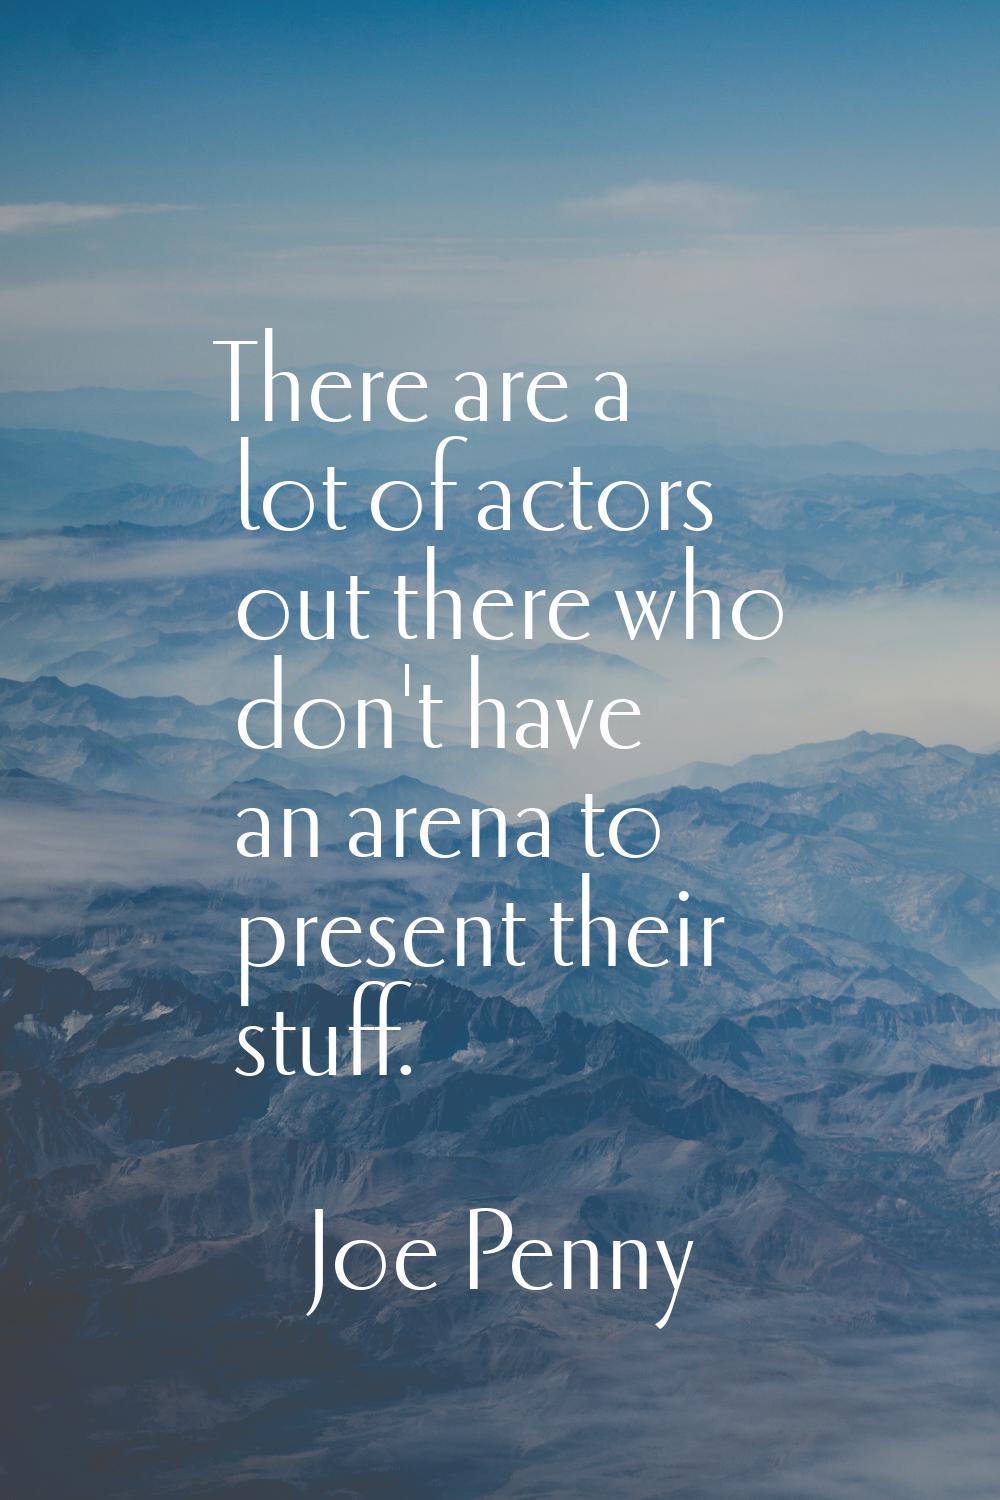 There are a lot of actors out there who don't have an arena to present their stuff.